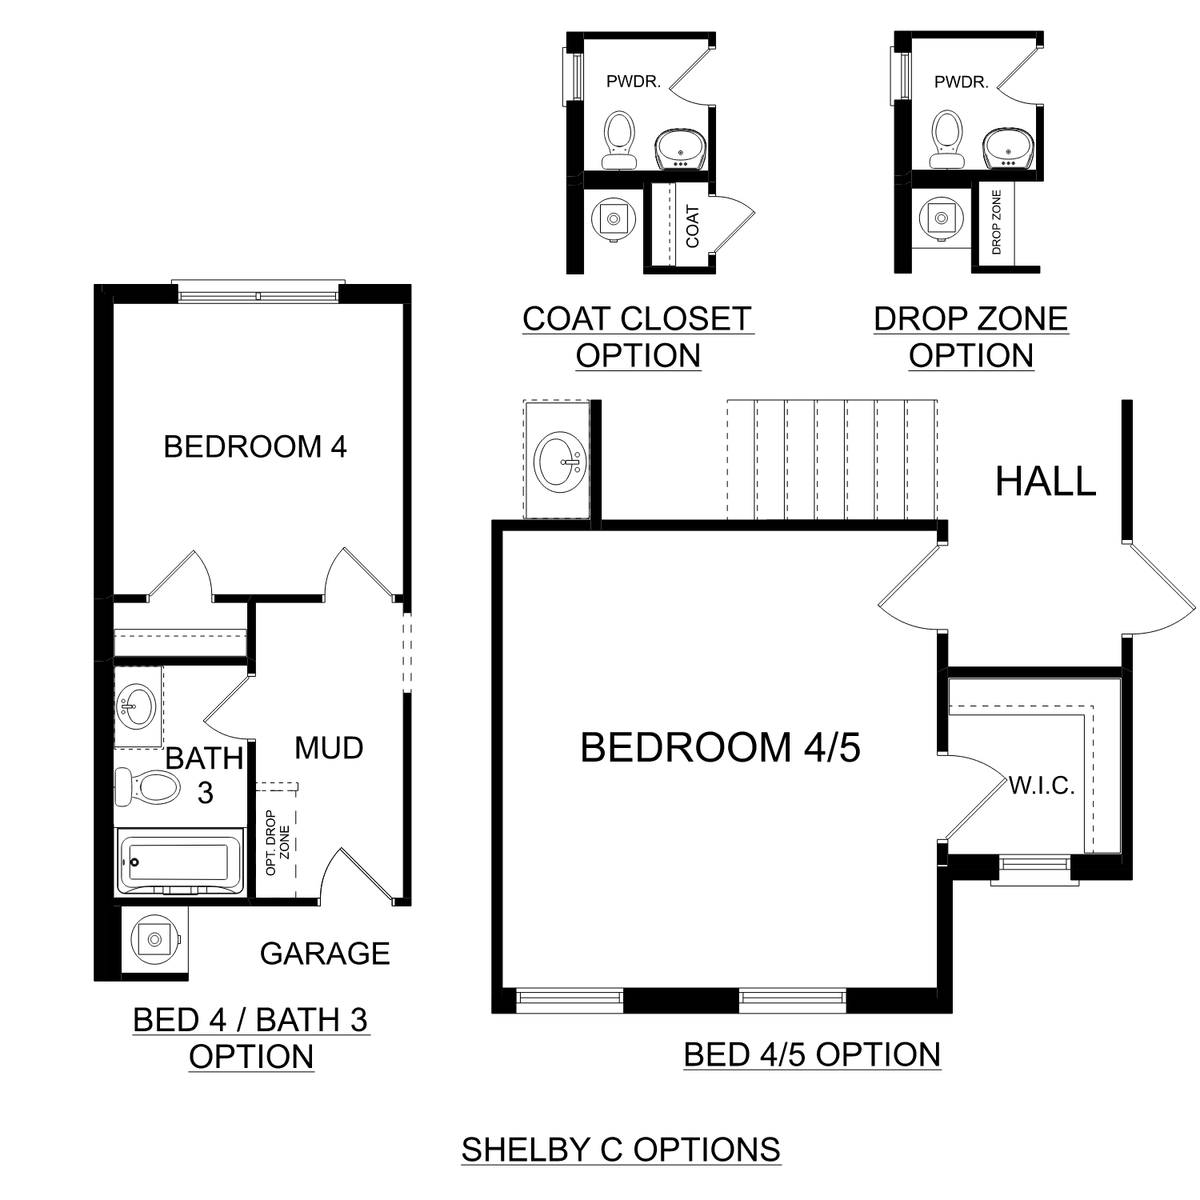 3 - The Shelby C floor plan layout for 327 Creek Grove Avenue in Davidson Homes' Creek Grove community.